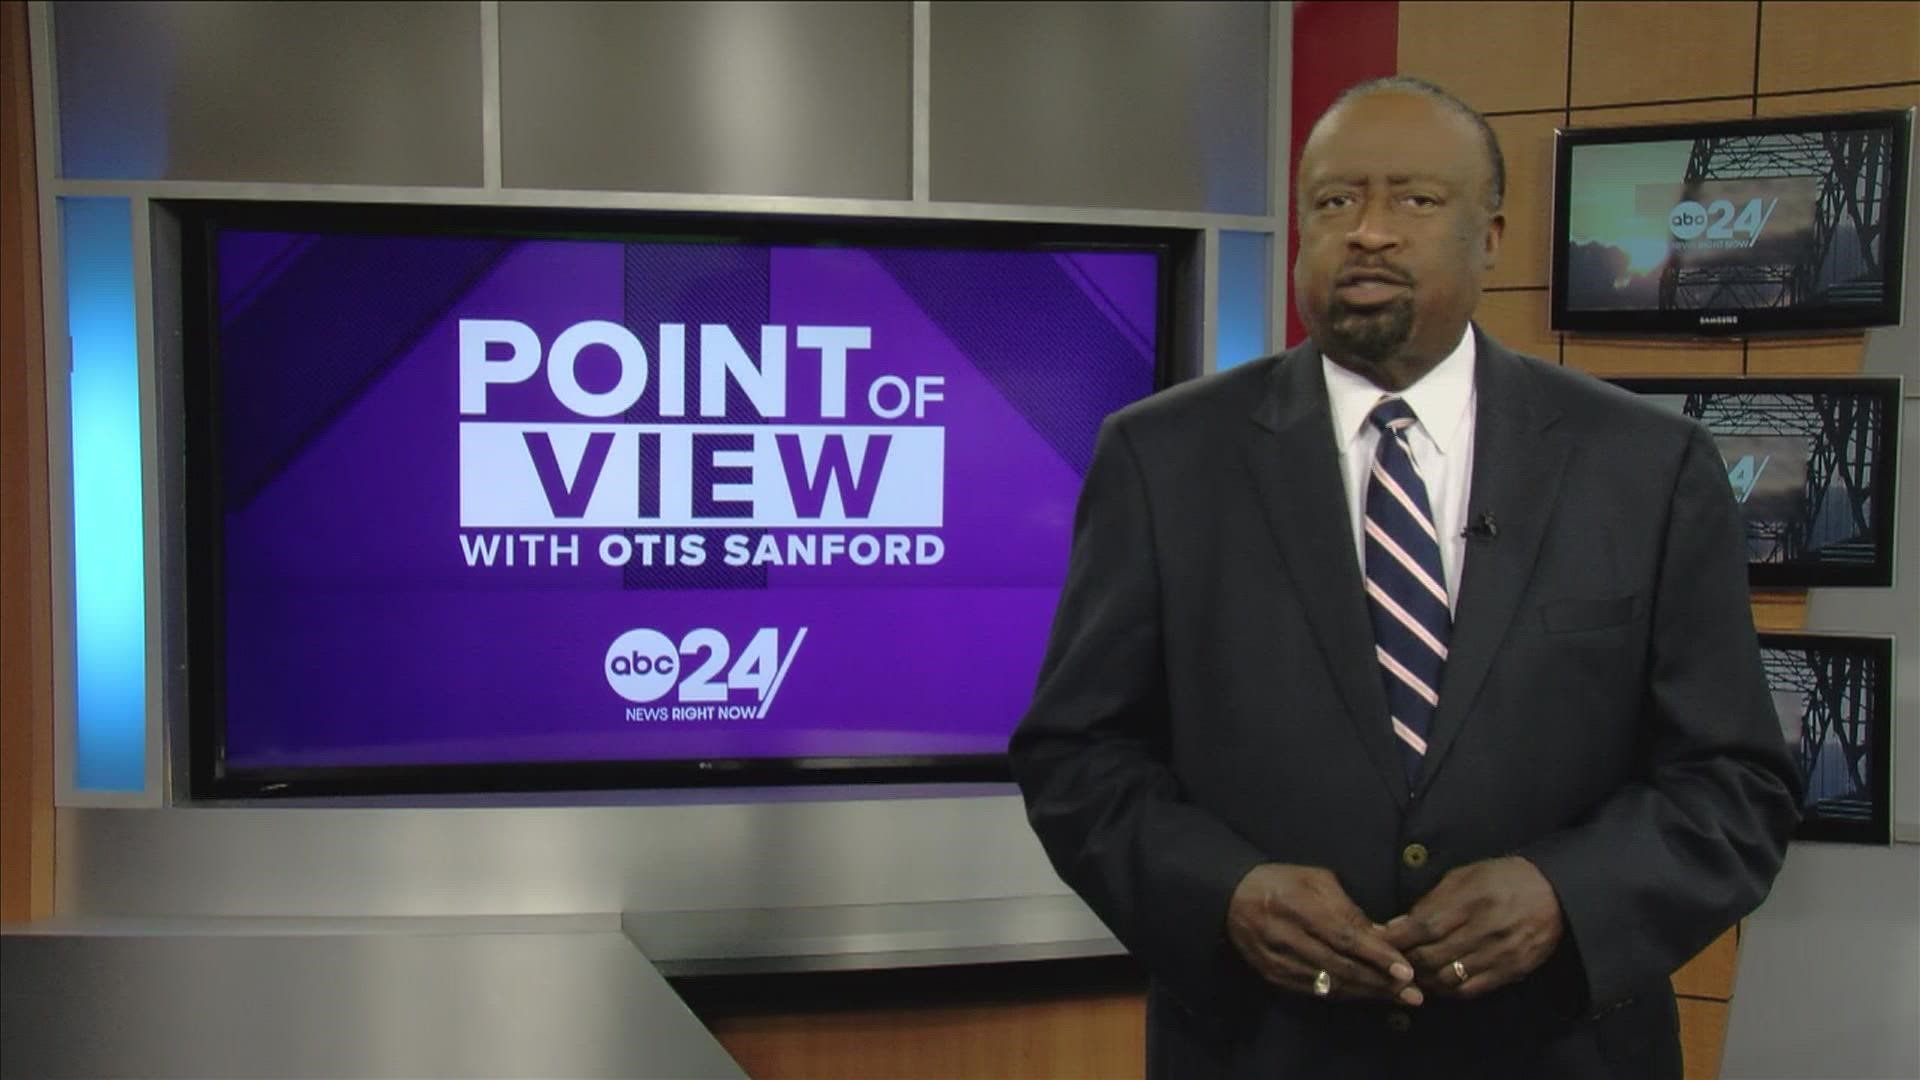 ABC24 political analyst and commentator Otis Sanford shared his point of view on the license plate issues at the Shelby County Clerk’s office.